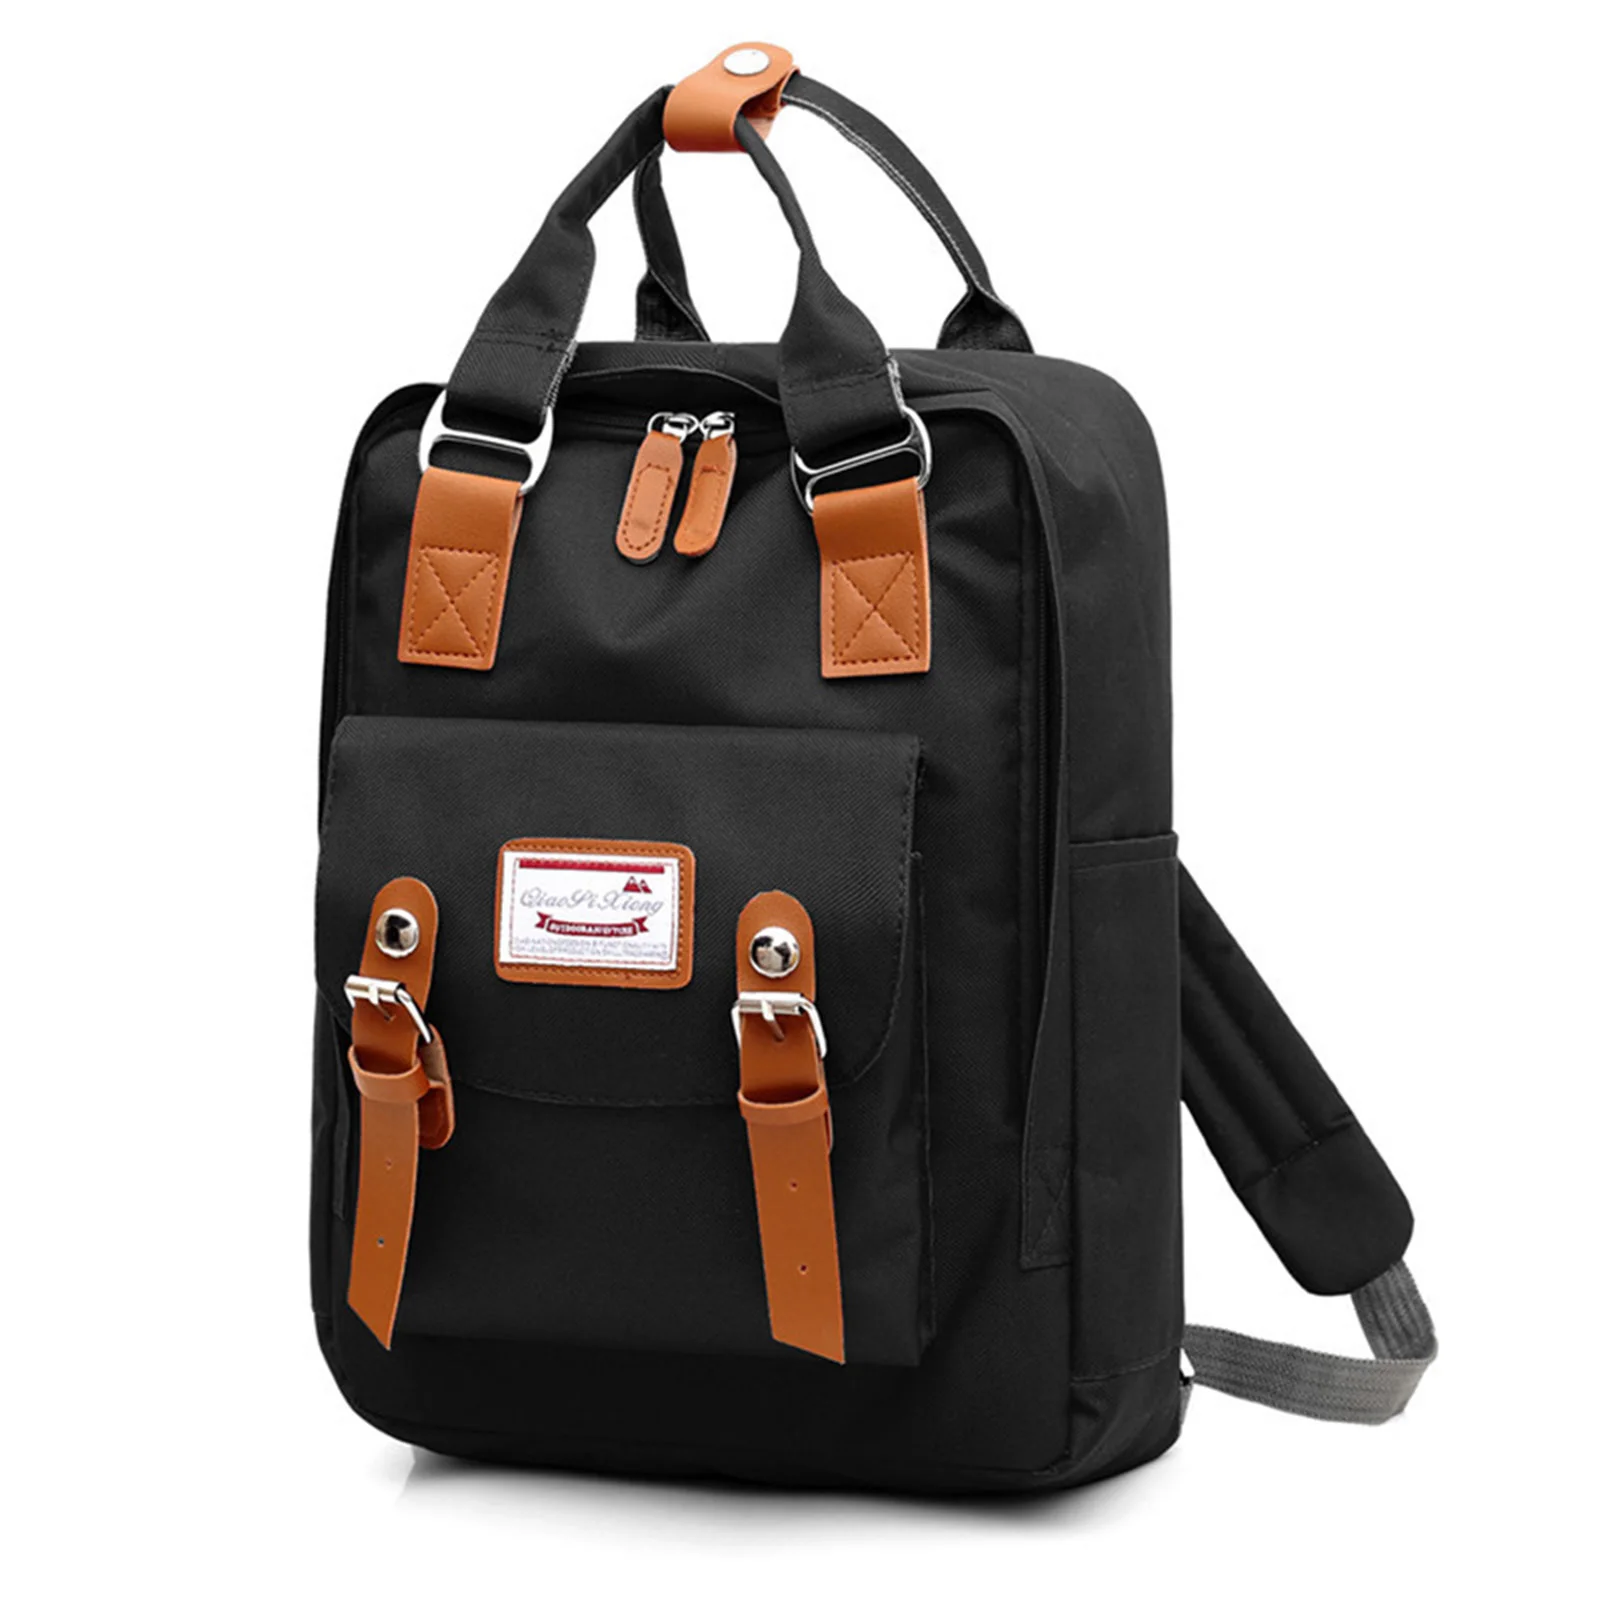 

Classical Oxford Cloth Backpack Large Capacity Bookbag with USB Interface & Handles for Books Laptop Magazines